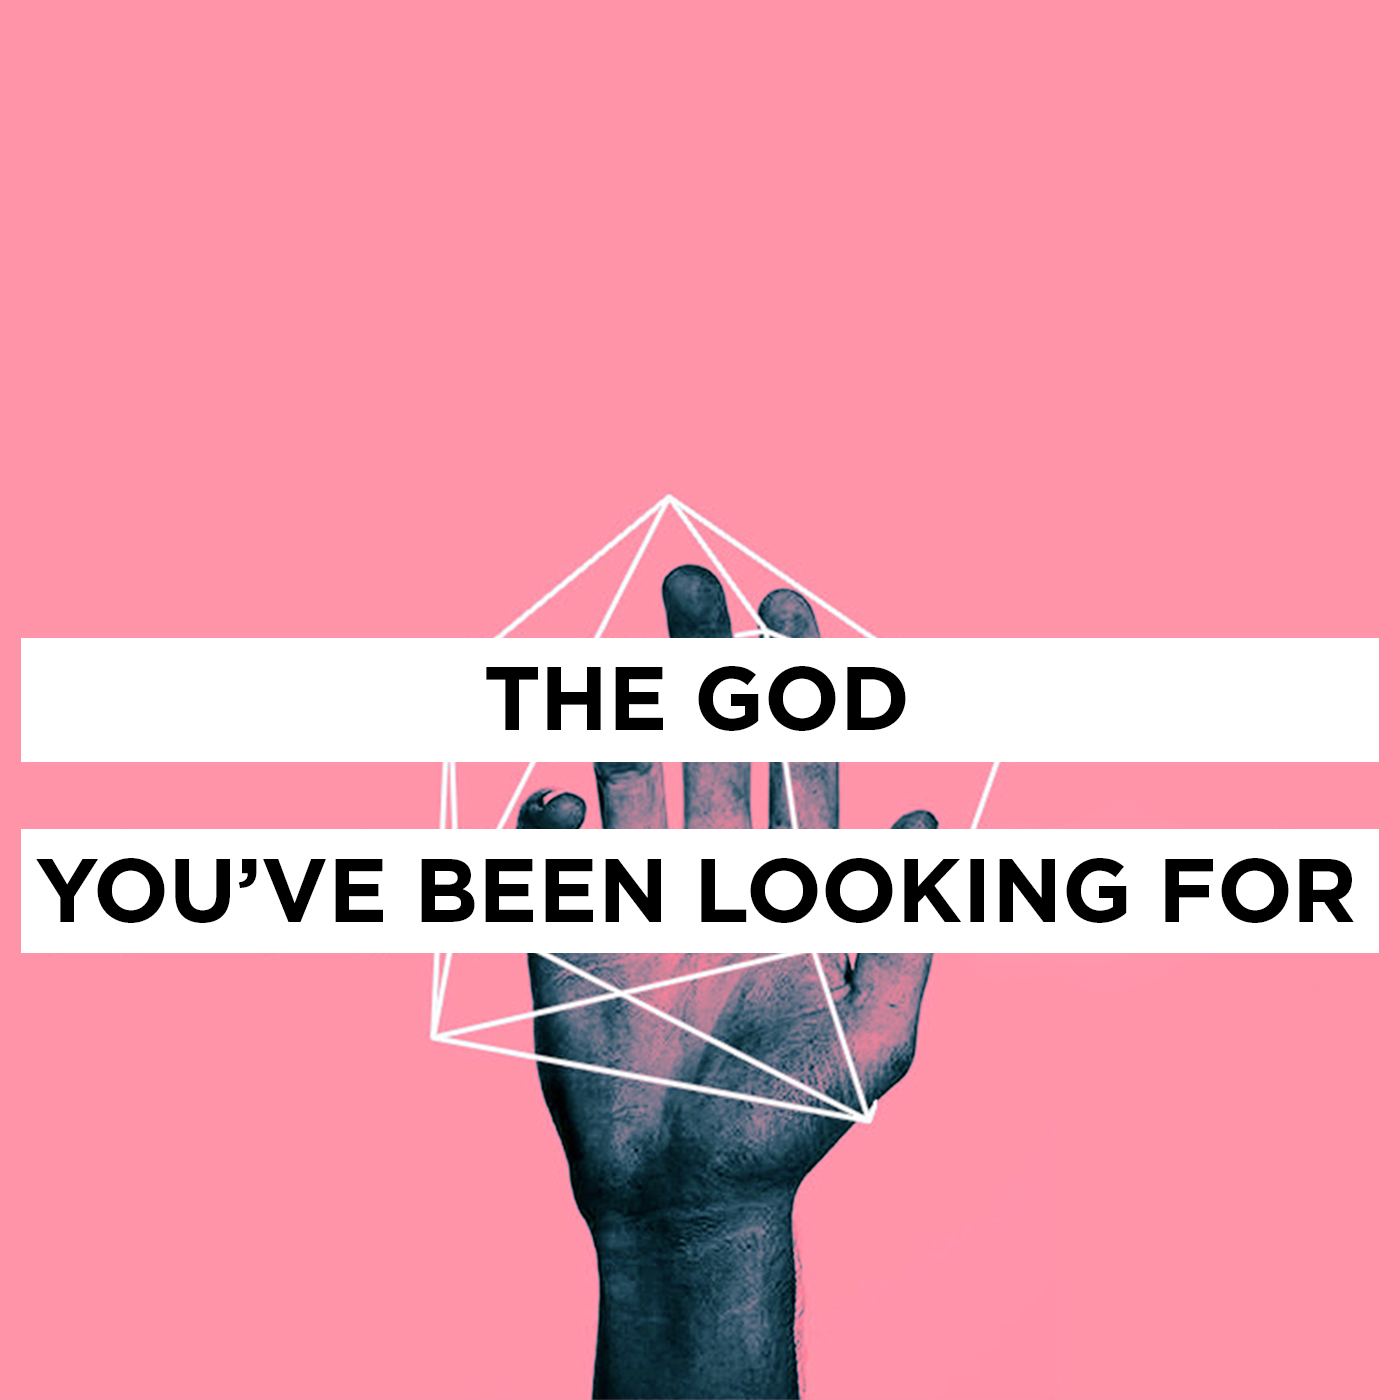 THE GOD YOU'VE BEEN LOOKING FOR P2: Graham Evans PM